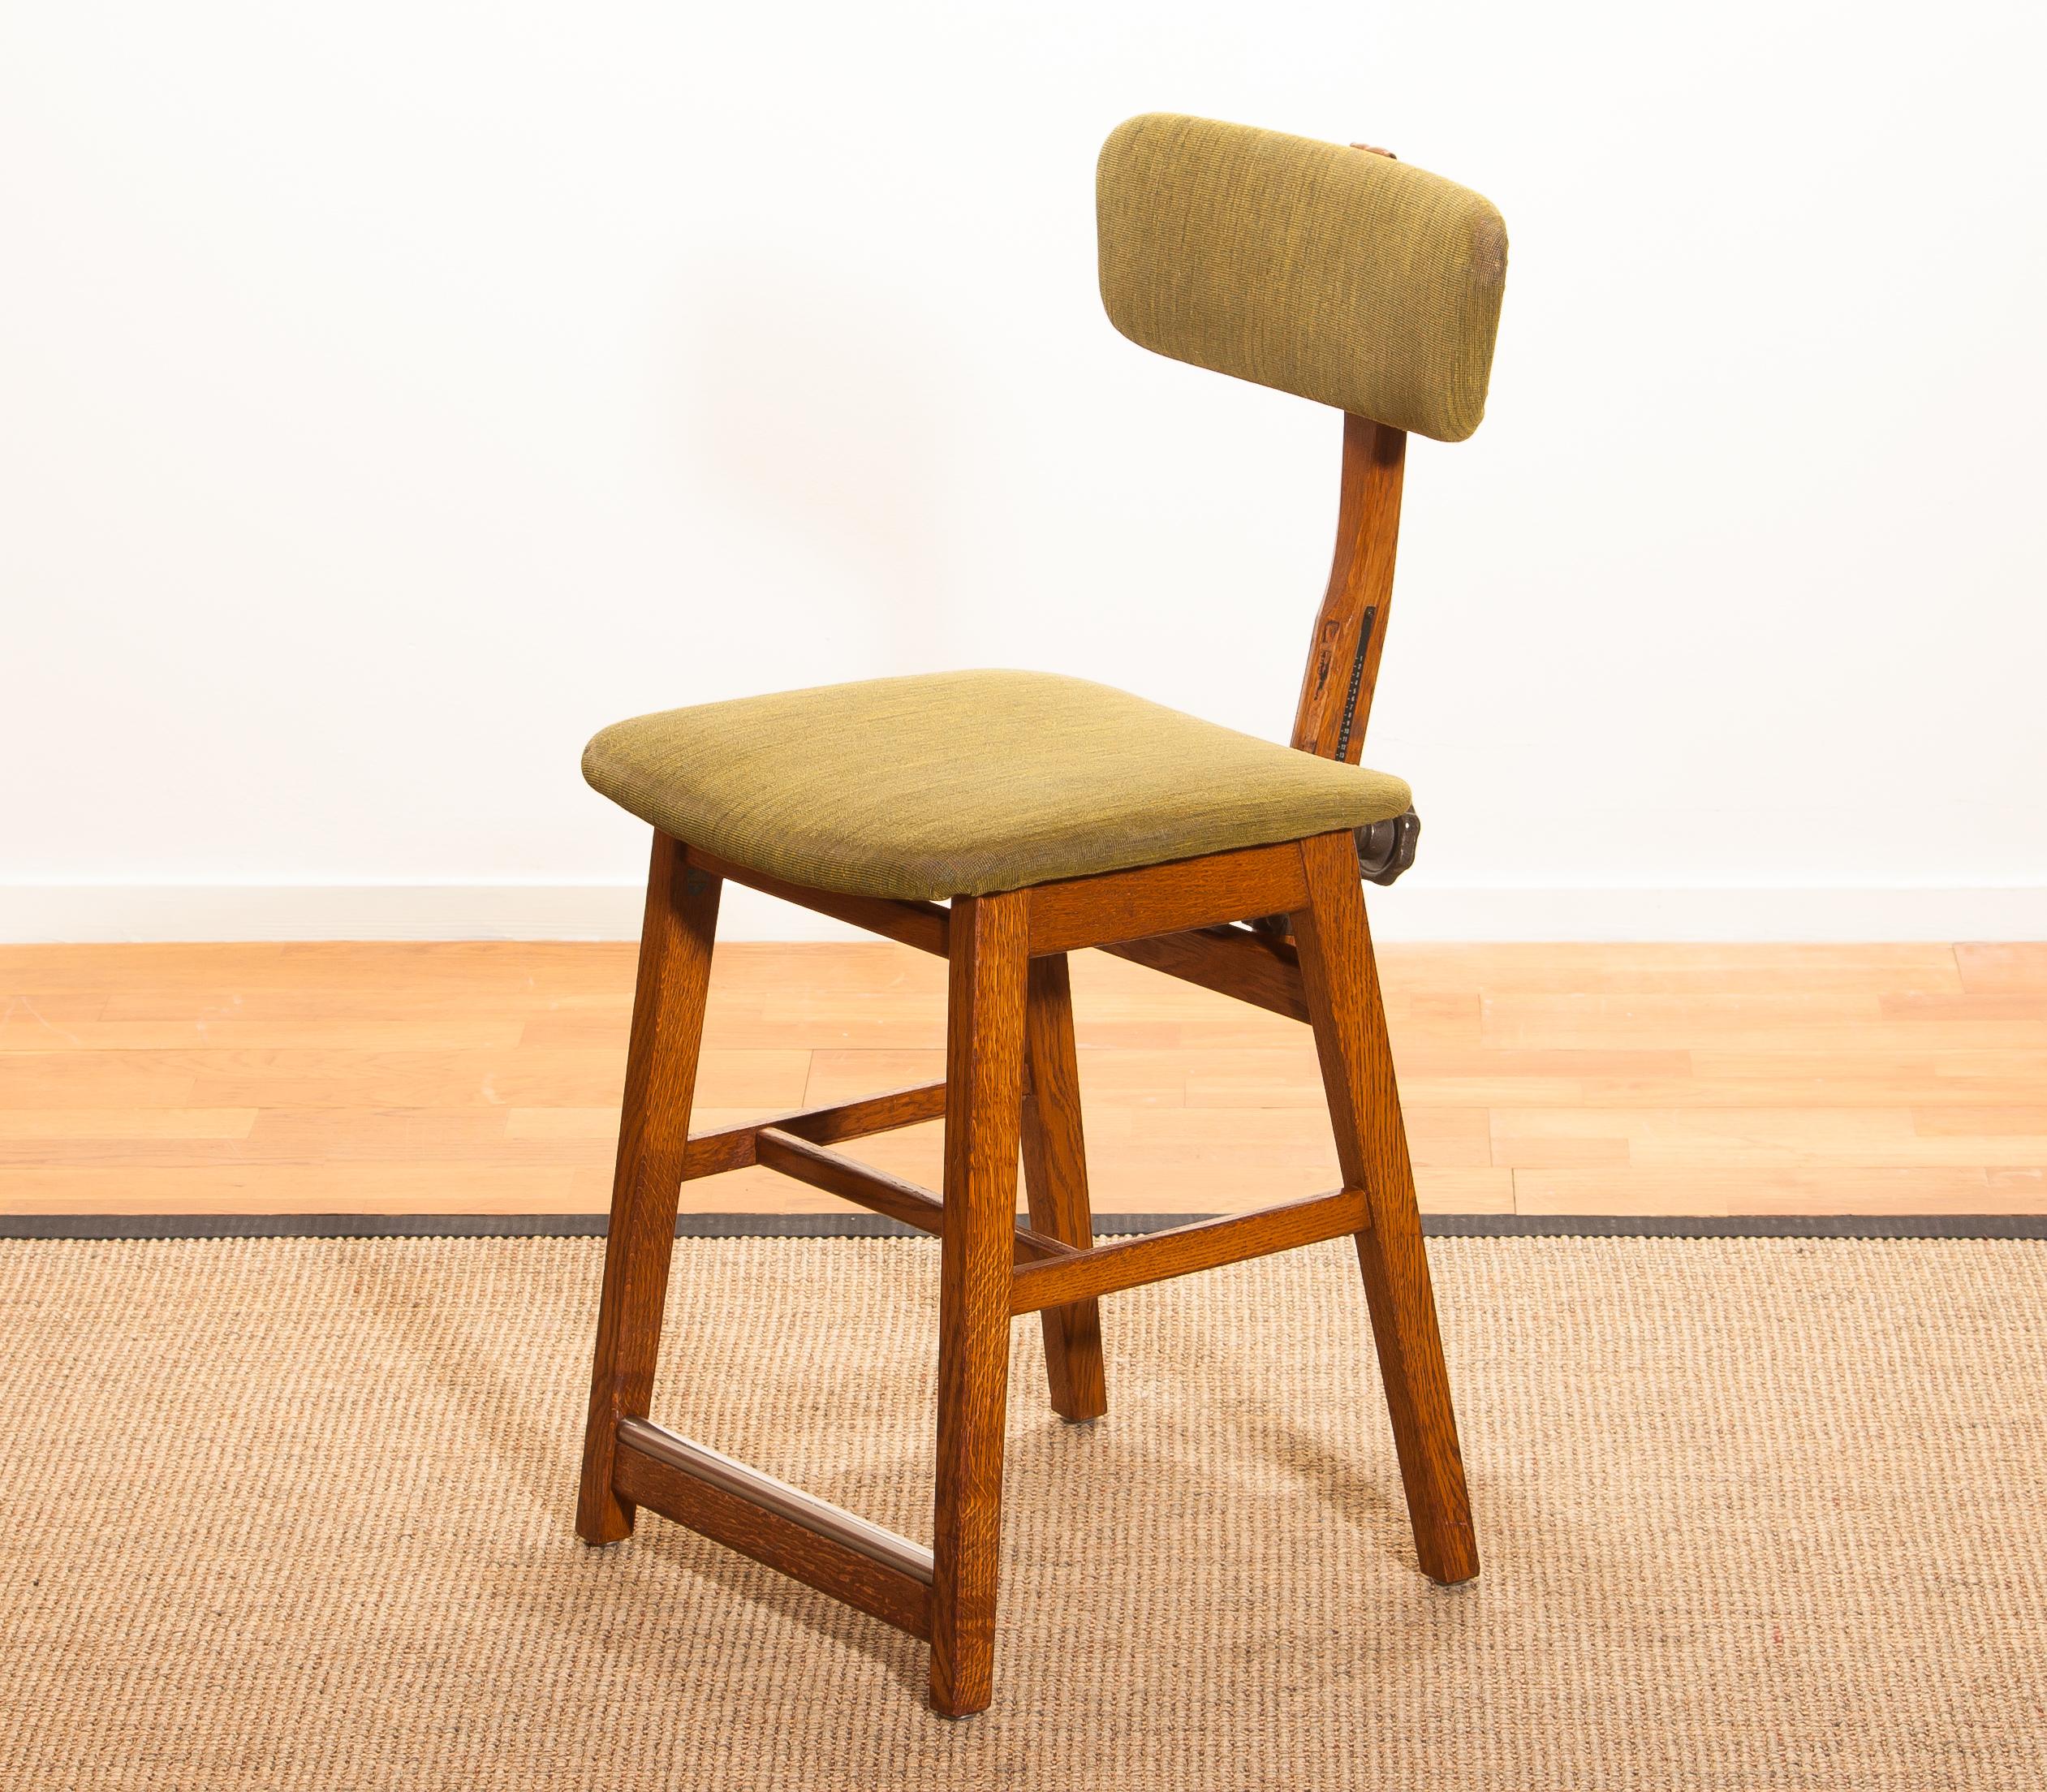 Mid-20th Century 1940s, Oak and Wool Desk Chair by Âtvidabergs, Sweden